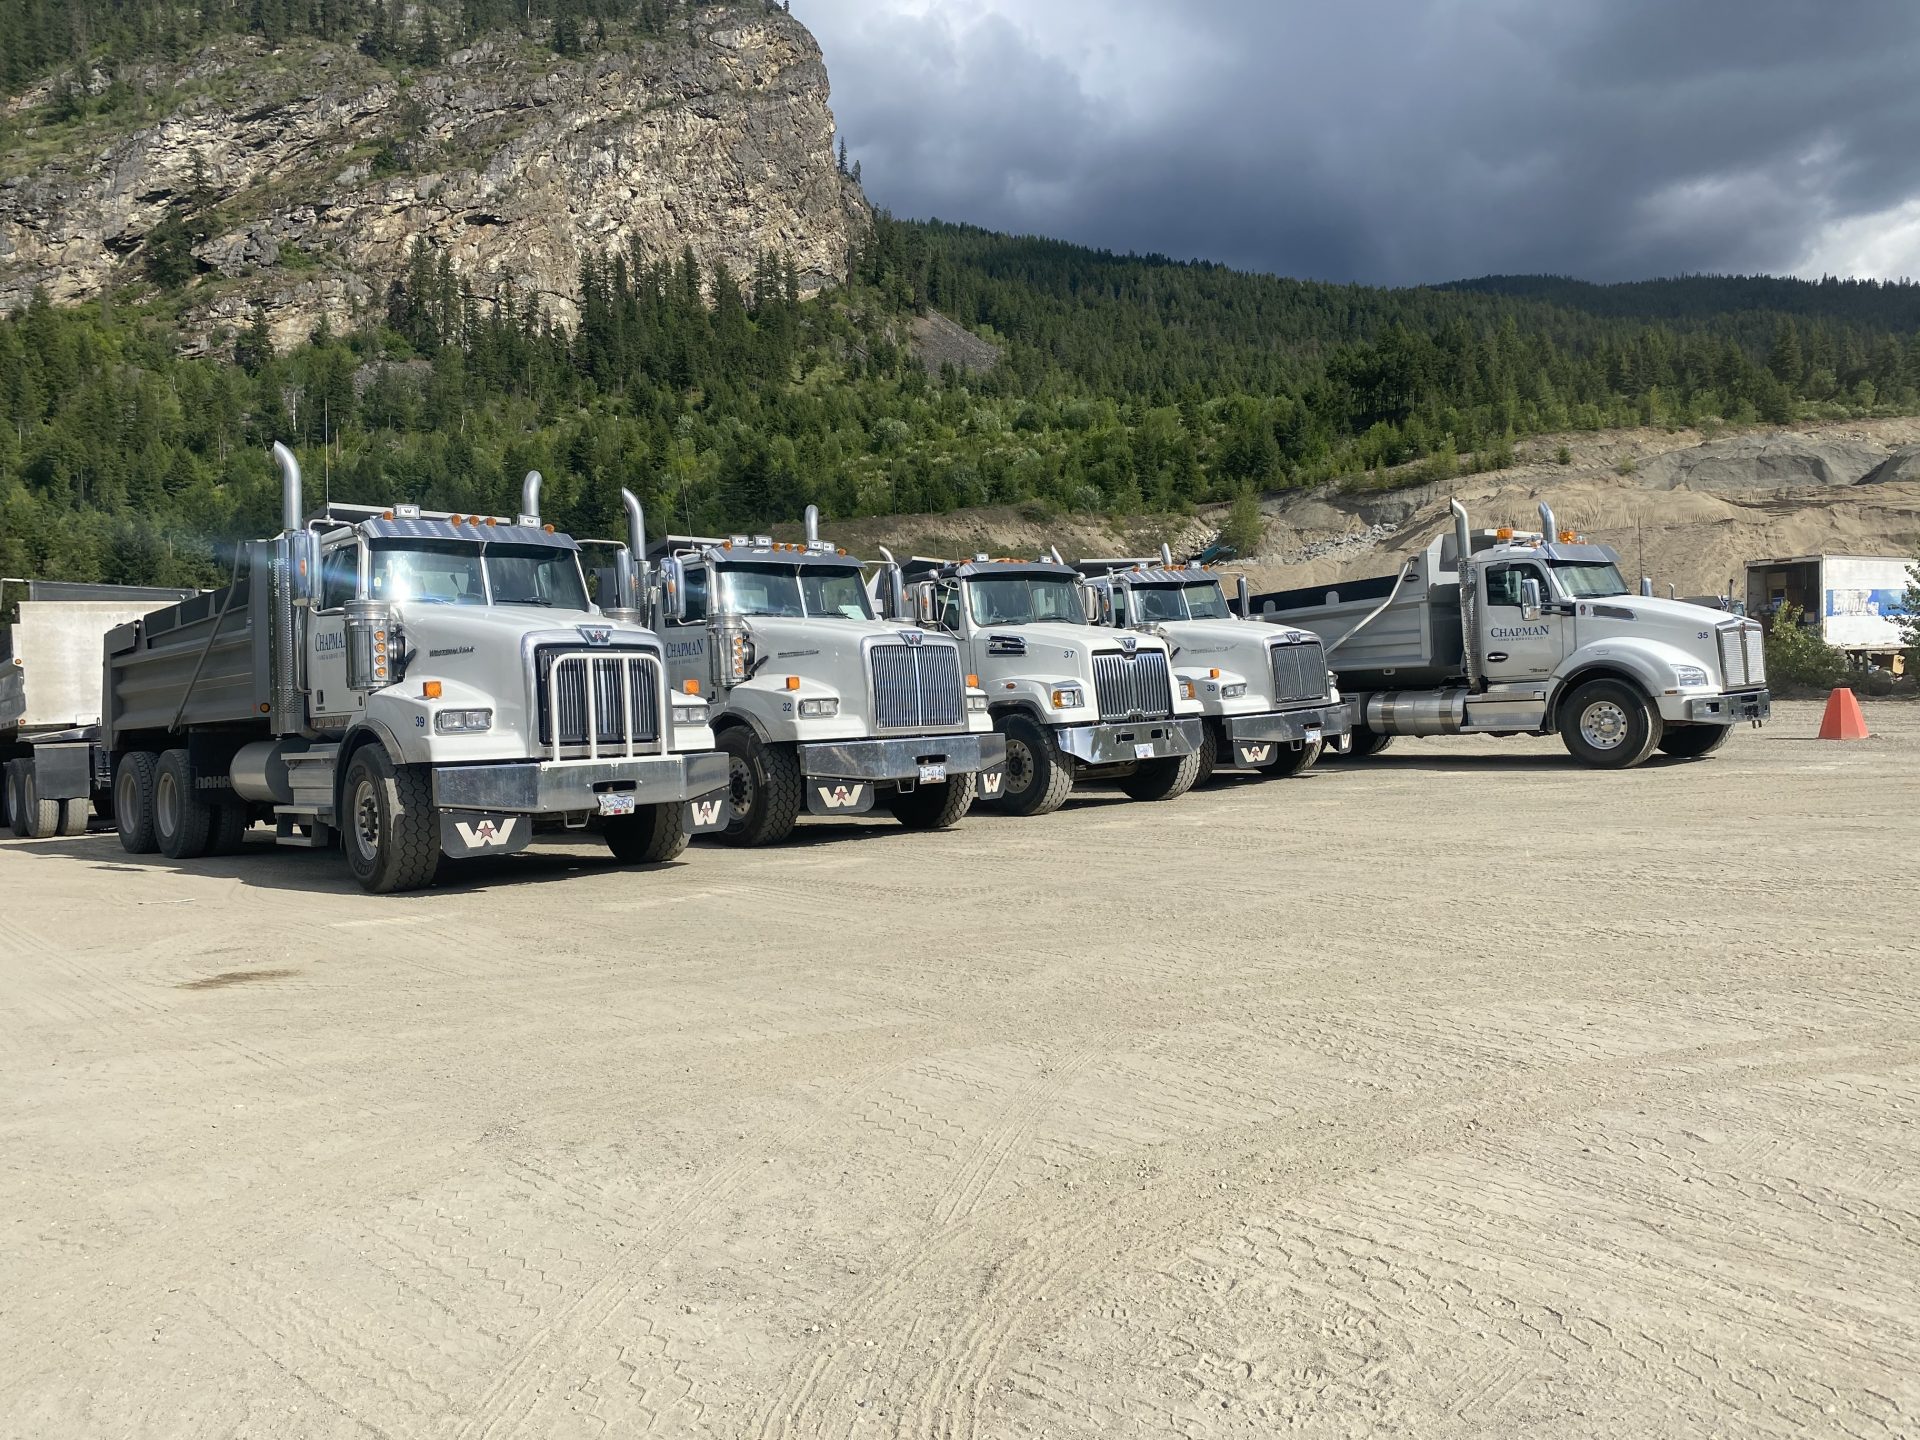 Chapman trucks for trucking & hauling services